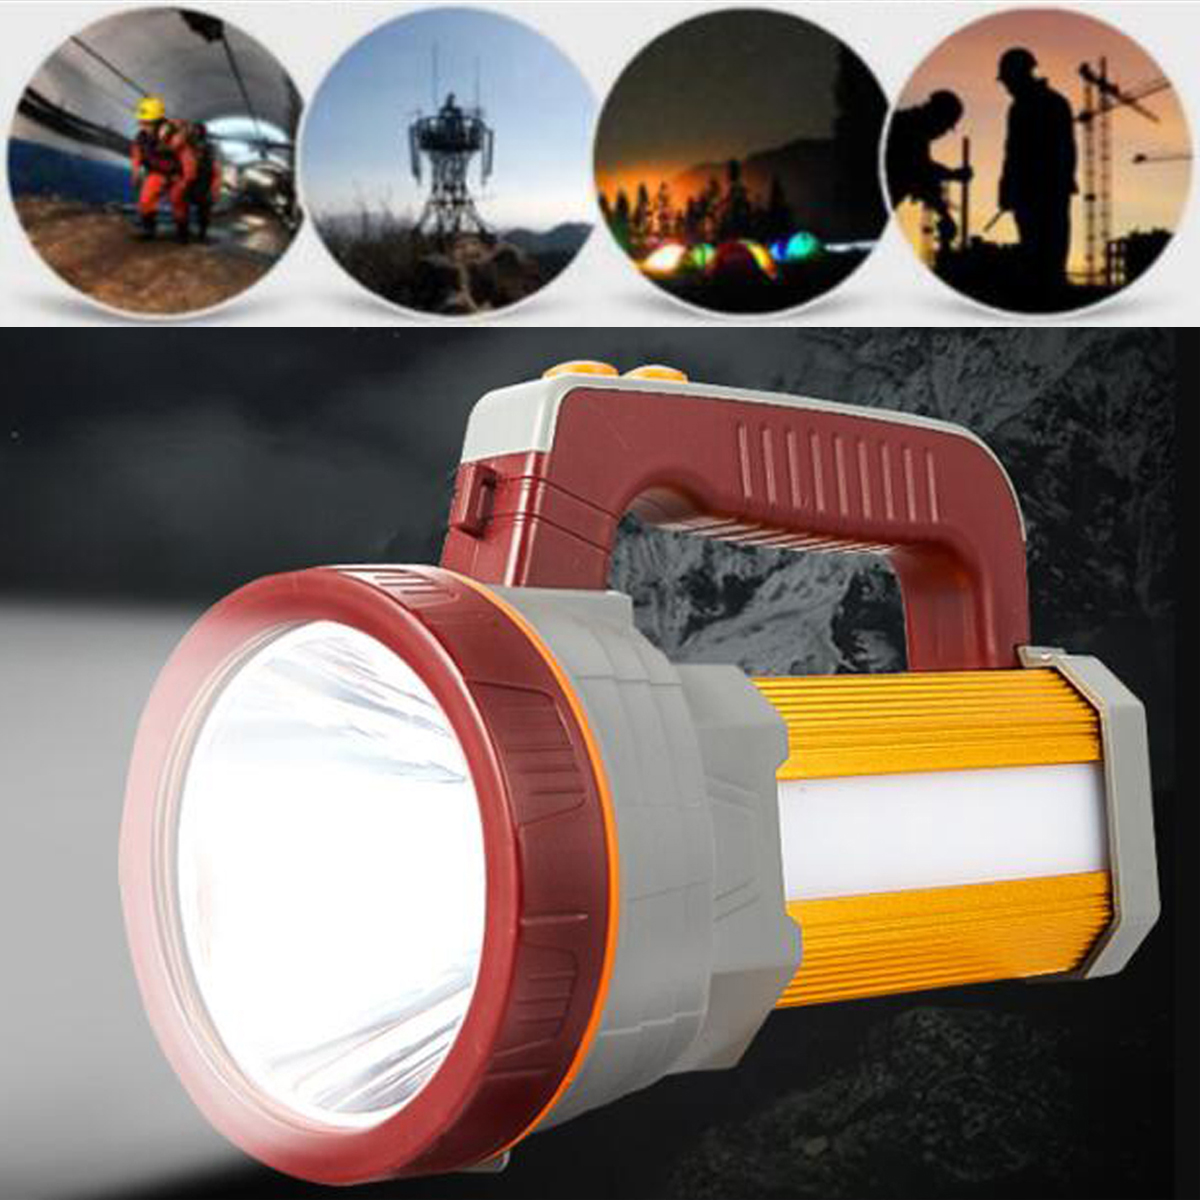 3000LM-USB-Rechargeable-Waterproof-Portable-LED-Spotlight-Searchlight-1605853